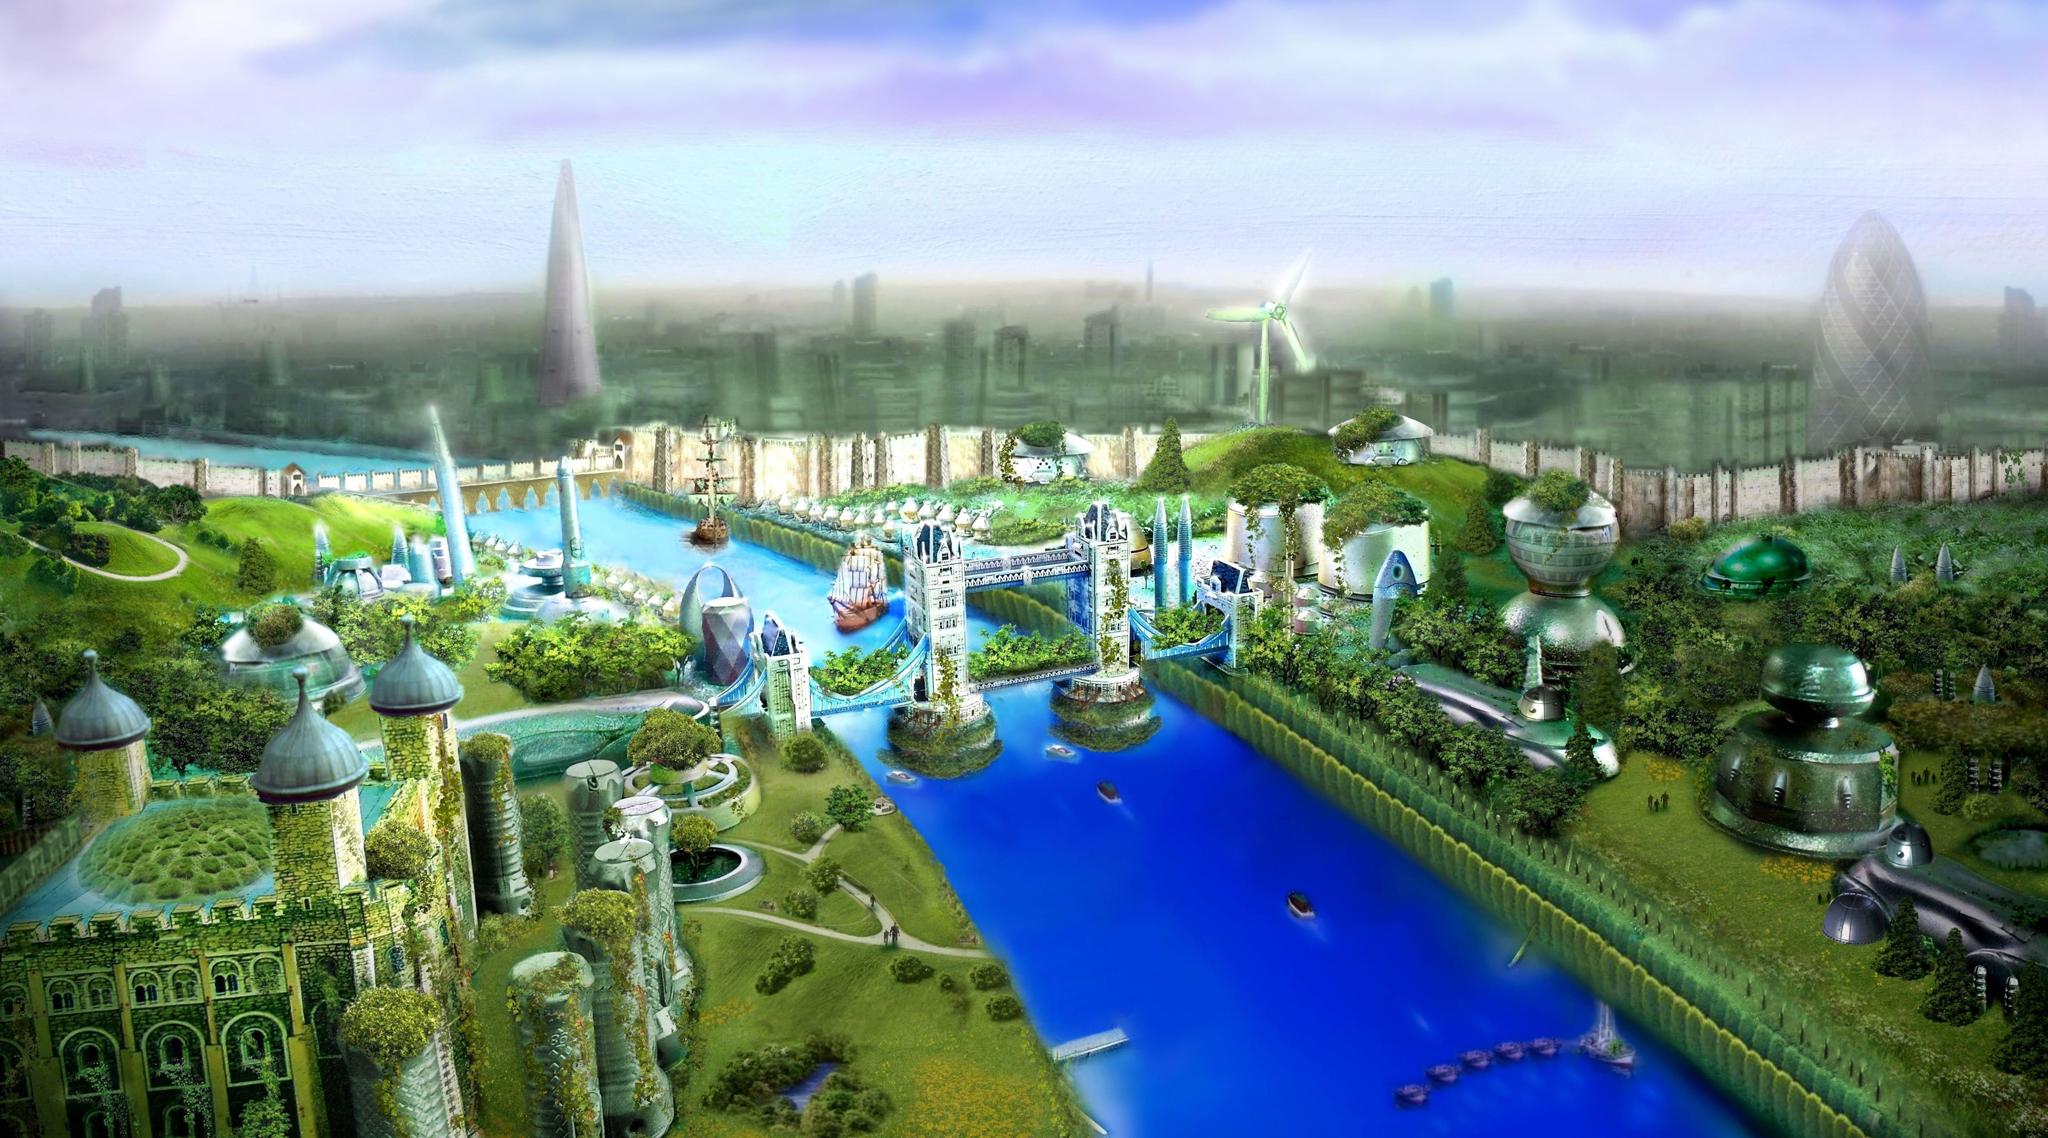 A green London re-imagined in 2121